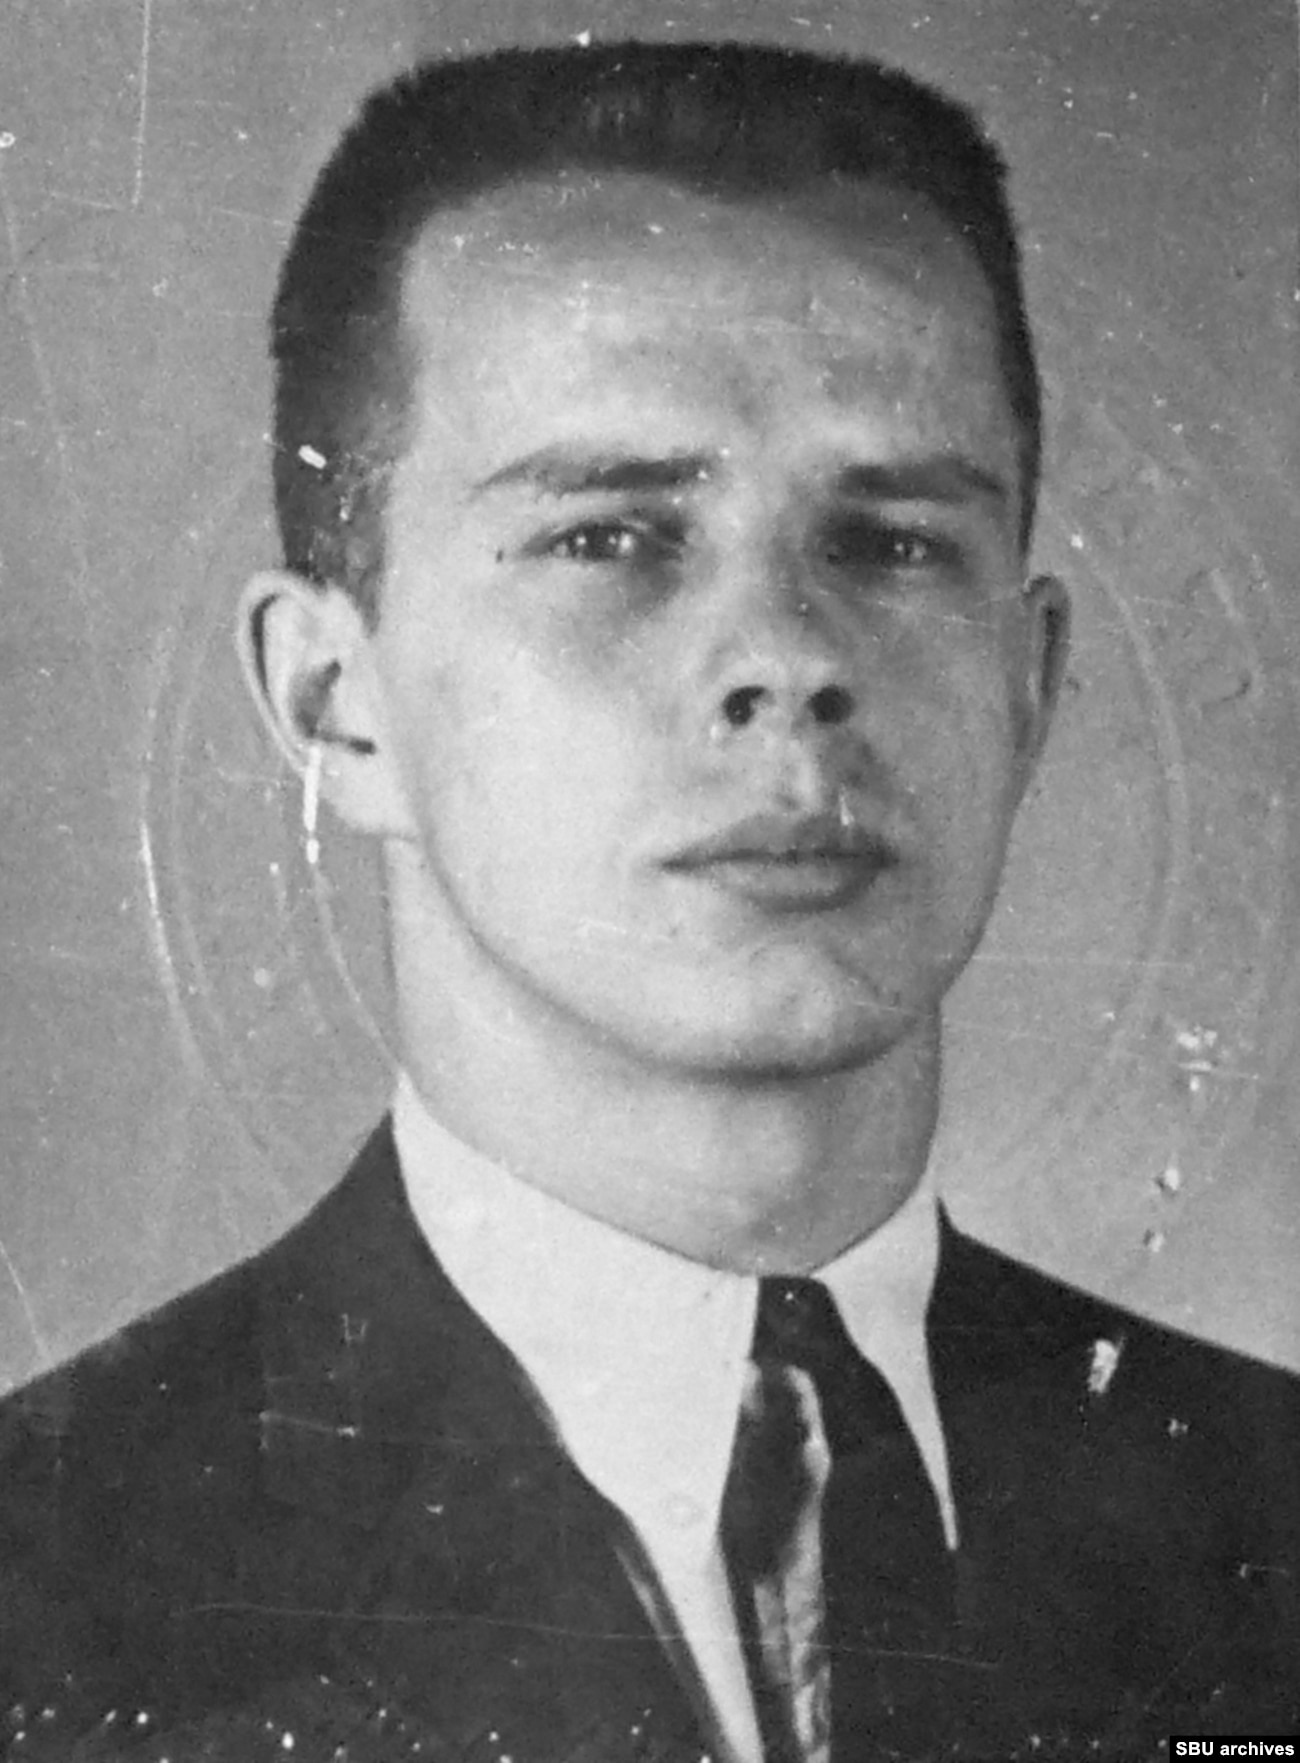 Marvin Makinen was studying chemistry in West Berlin when he was contacted by U.S. intelligence operatives.